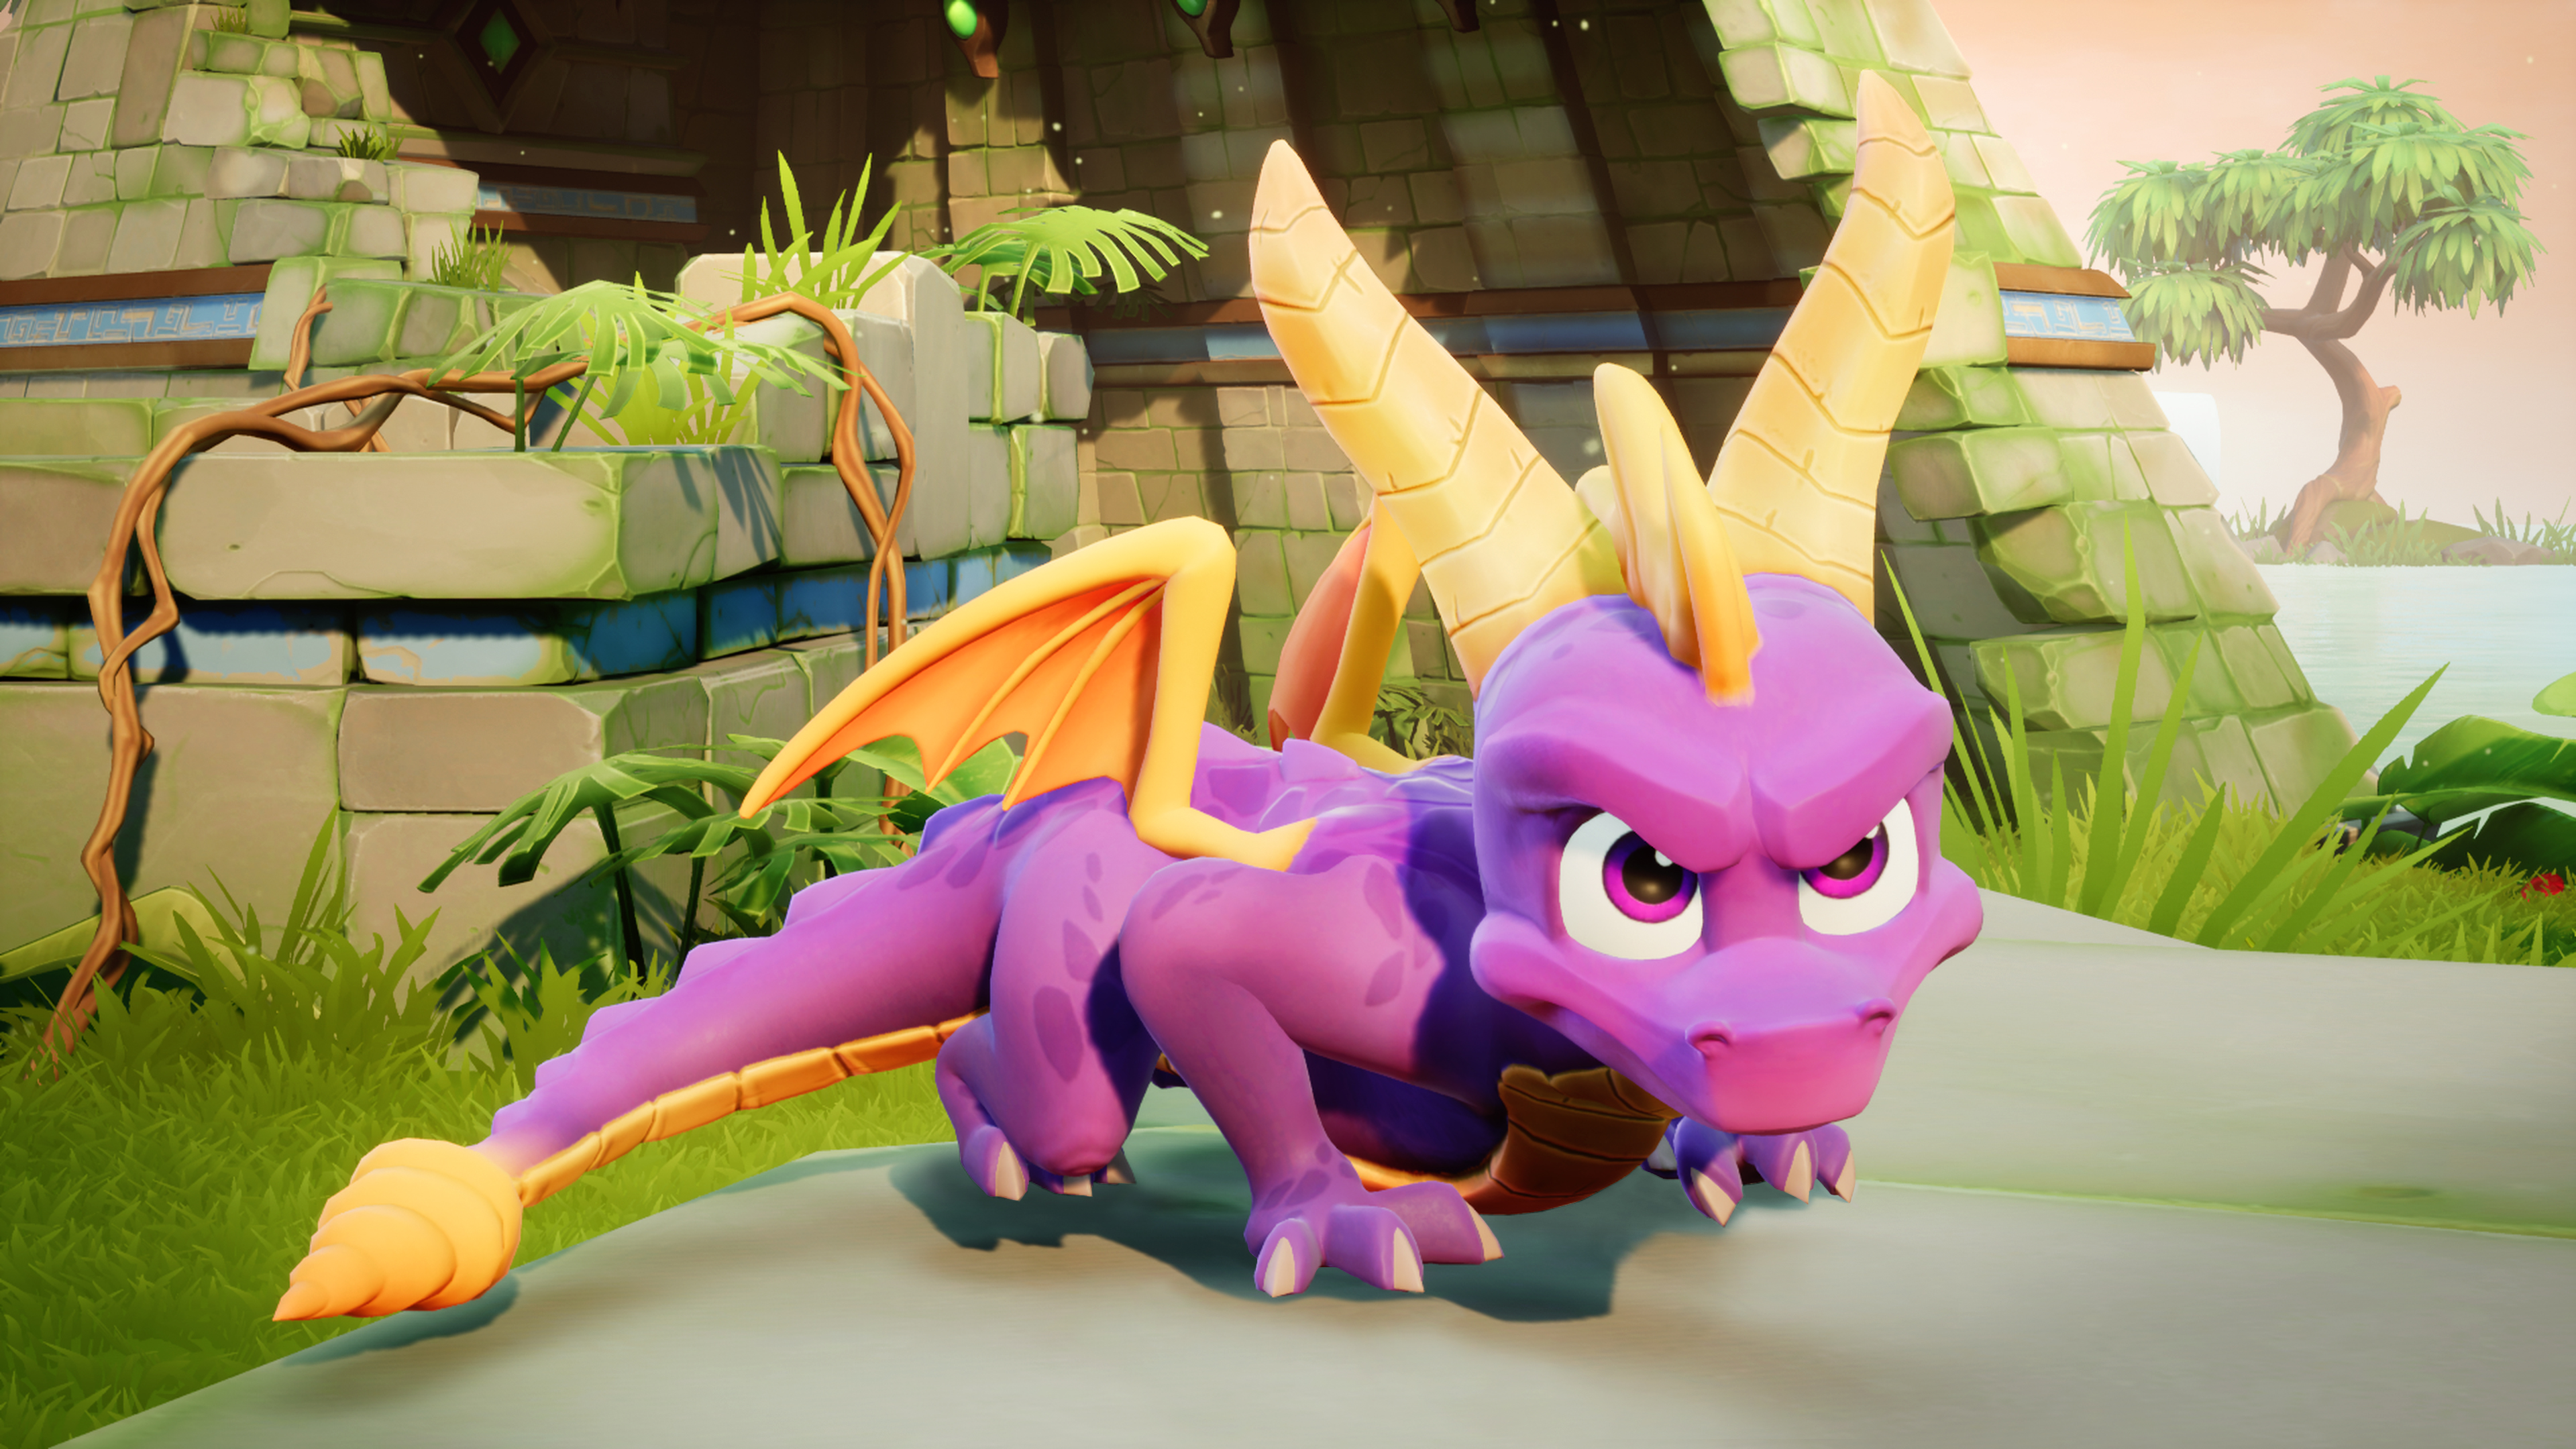 Spyro: Reignited Trilogy officially announced; screenshots and trailer released